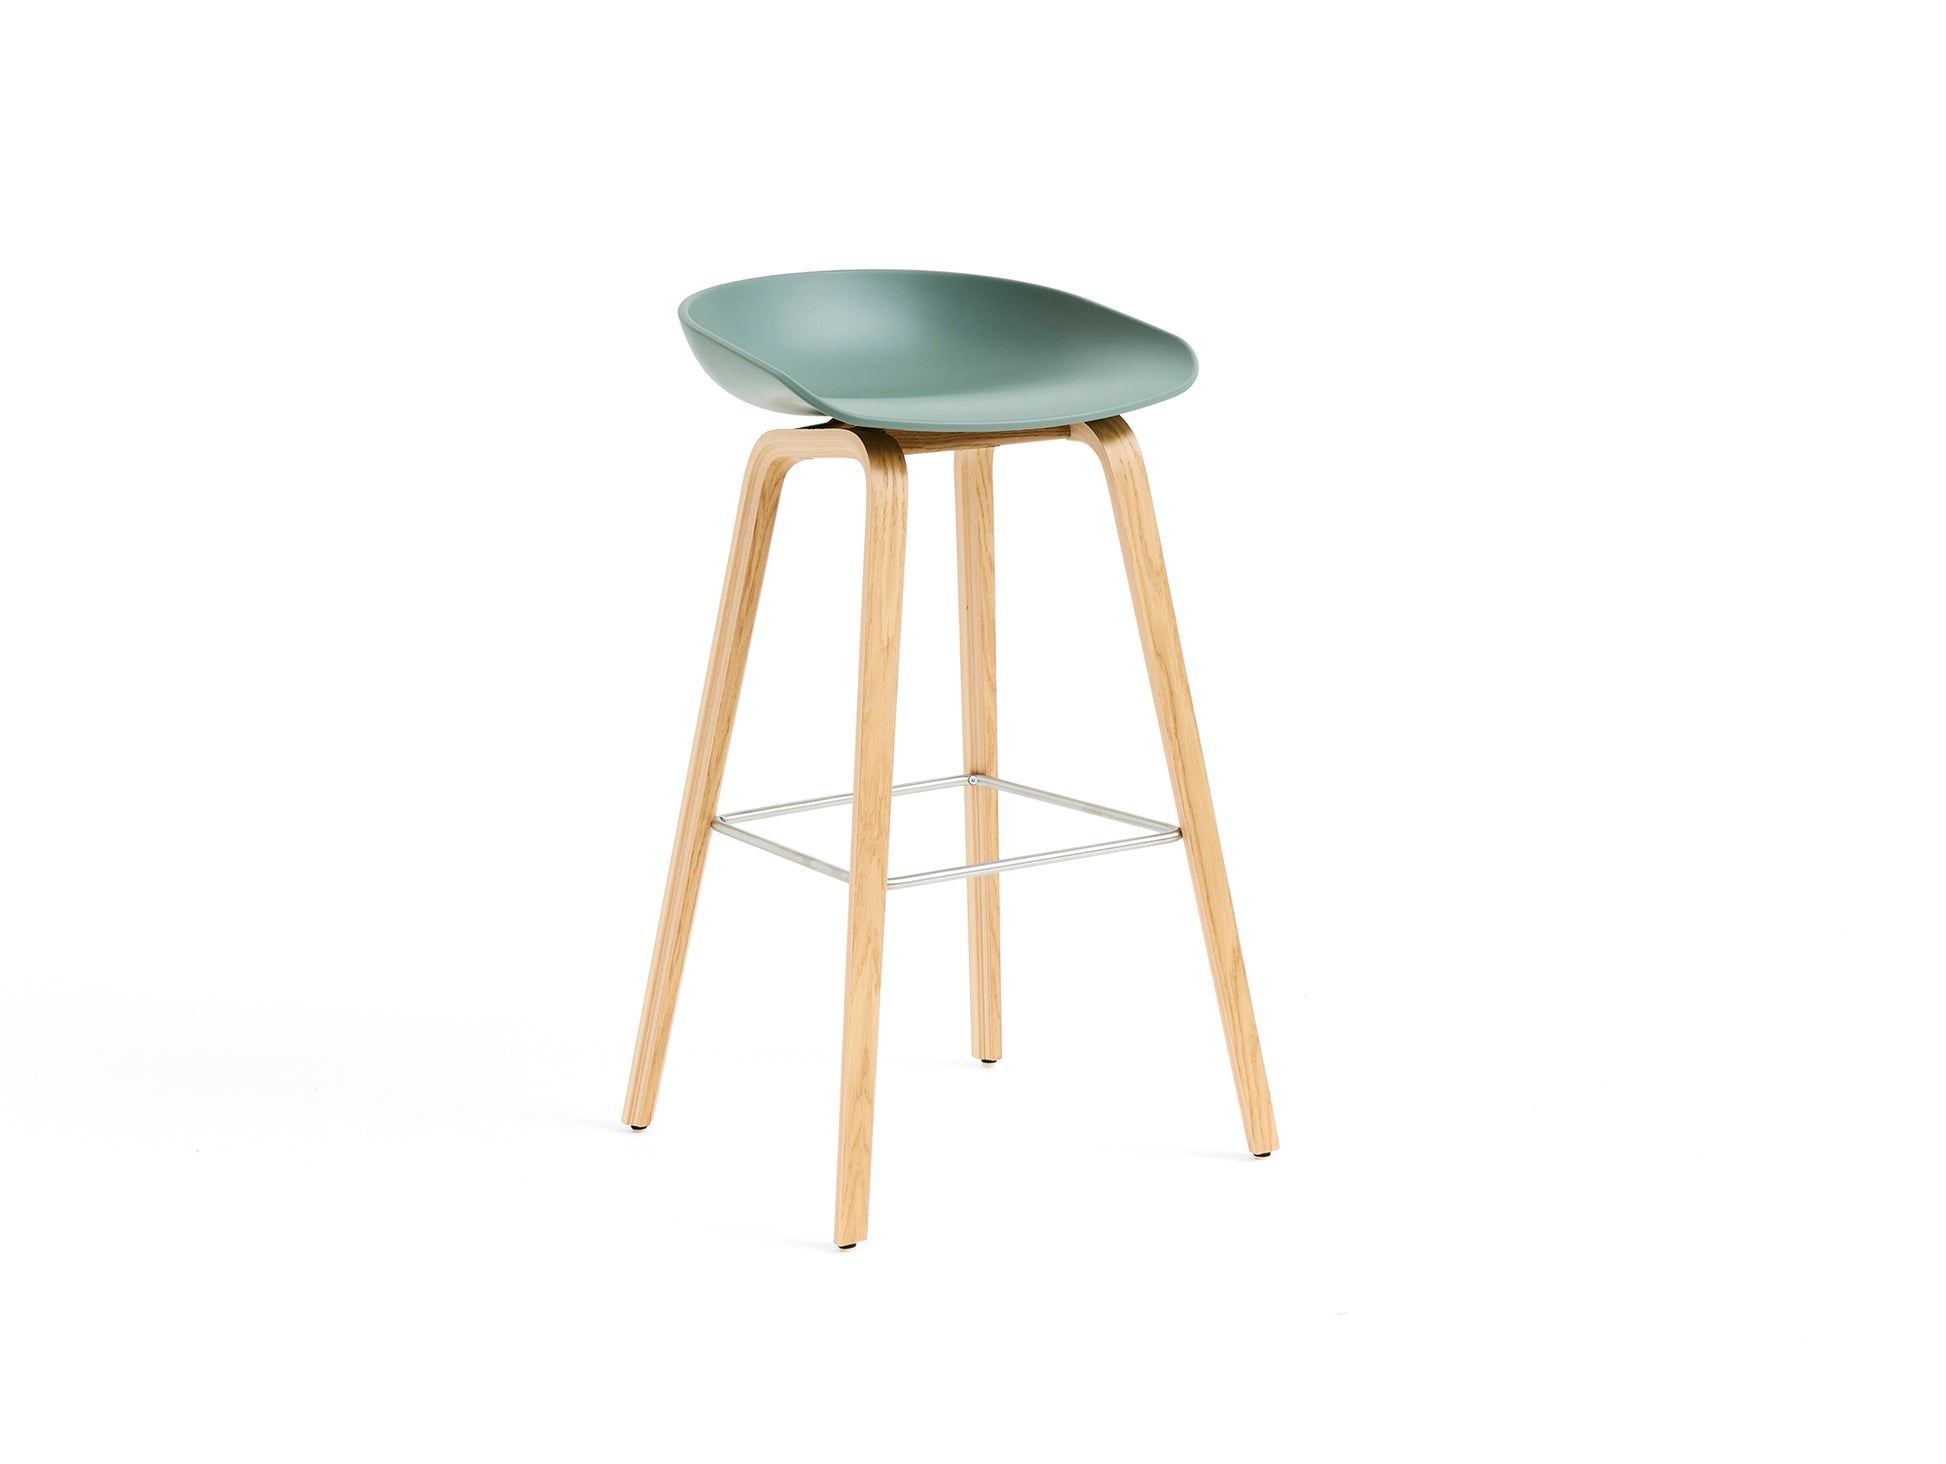 About A Stool AAS 32 by HAY - H 75cm / Fall Green Shell / Lacquered Oak Base